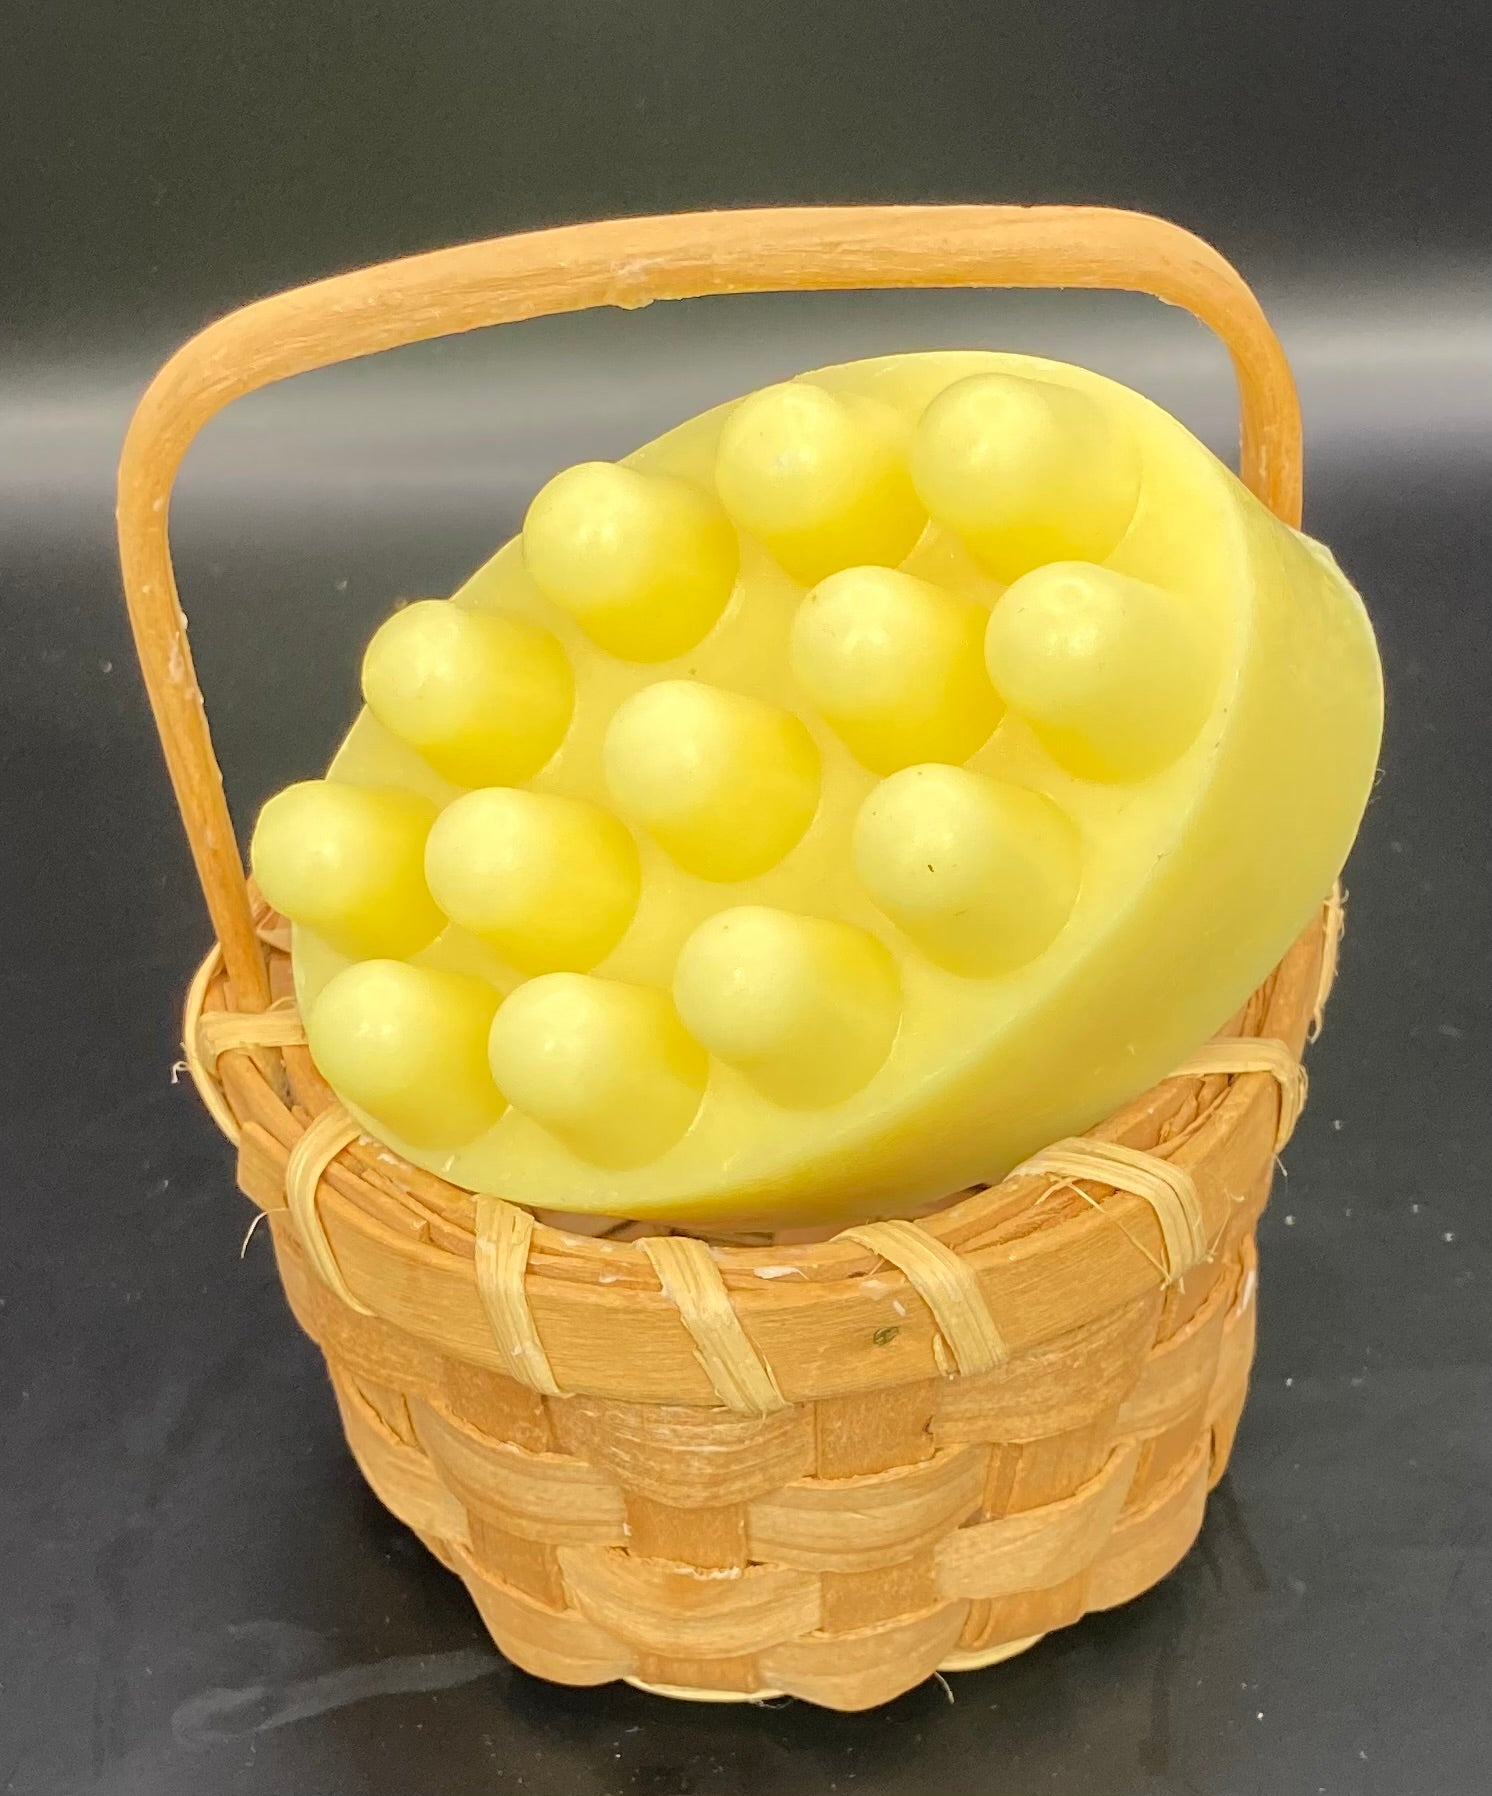 A soothing massage bar of Georgia Peach Scented Goats Milk Soap.  This is the bar with the bumps that make a wonderful spa-like experience.  $7  Each item is individually created and may appear different from the photo.